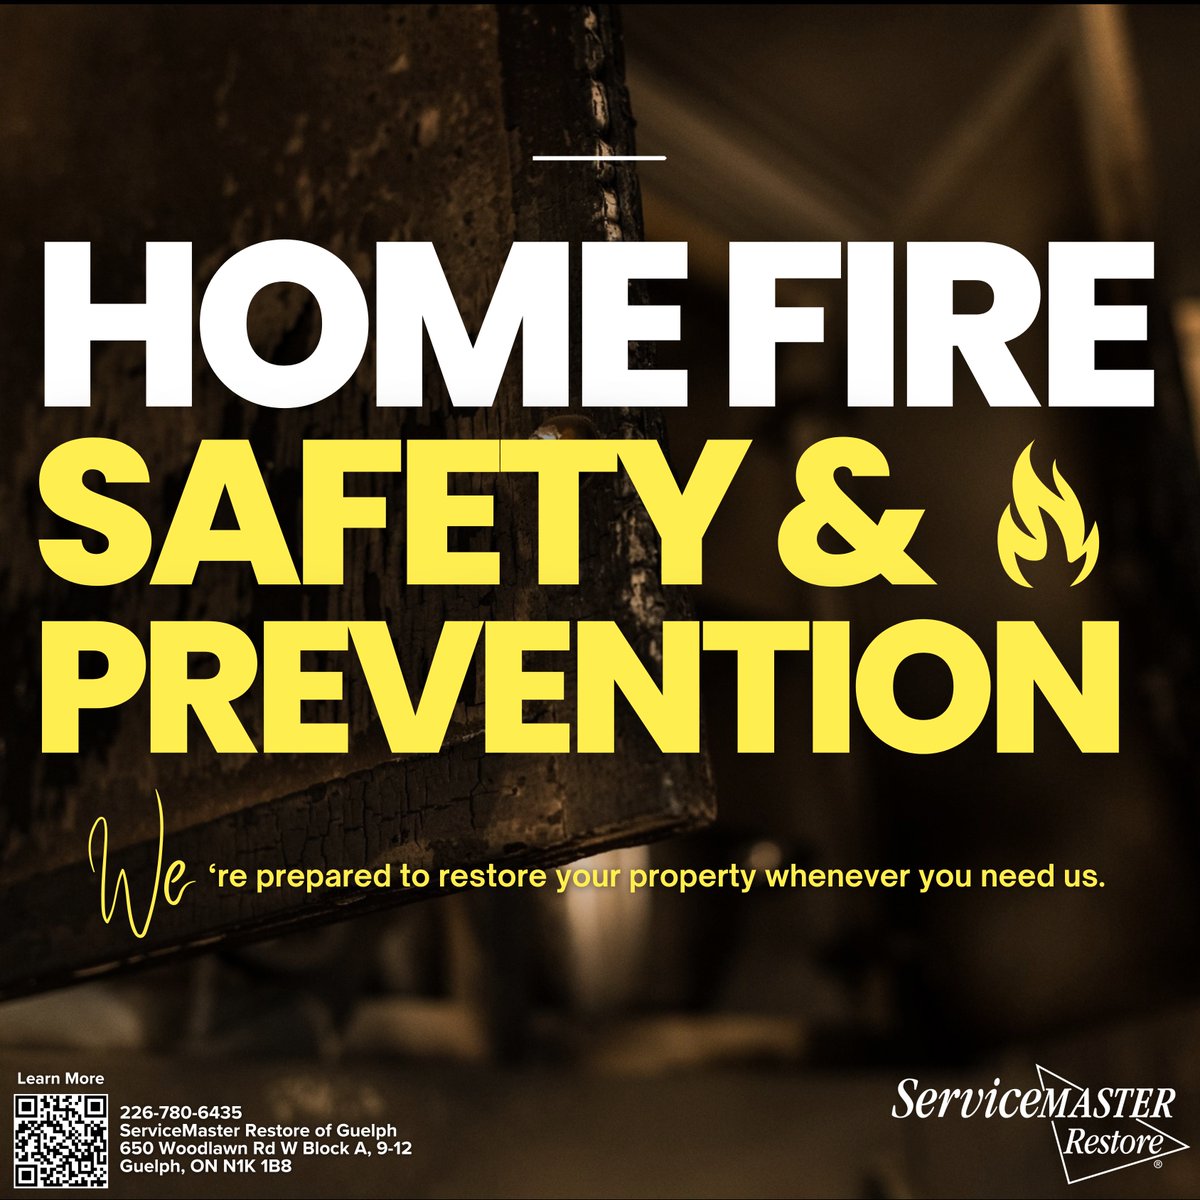 Here 👇 are some basic safety tips that can help minimize your risk of residential fires 🔥

Learn more: cutt.ly/oewHL9nY

#FireSafety #FirePrevention #FireDamage #Restoration #RestorationServices #PropertyRestoration #ServiceMasterRestore #ServiceMasterRestoreOfGuelph